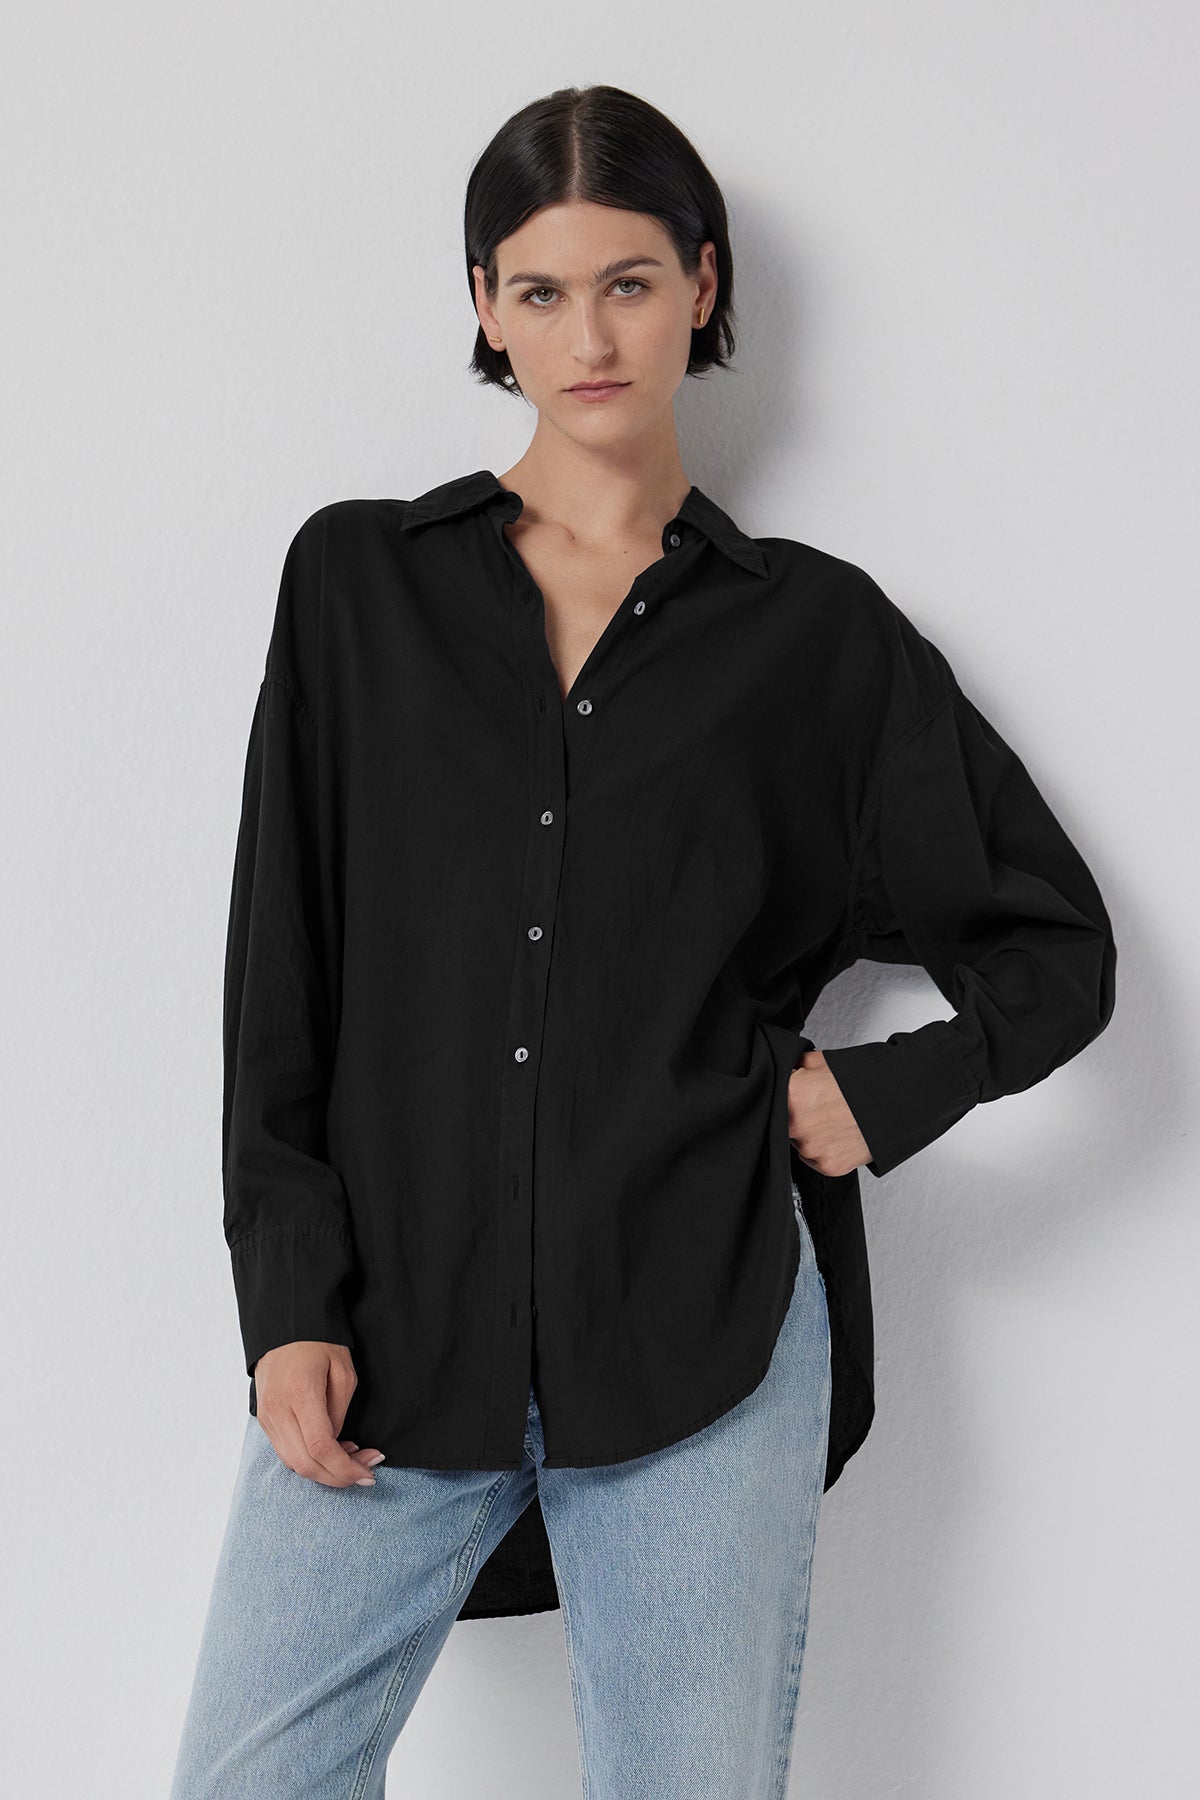 The model is wearing an oversized black REDONDO BUTTON-UP SHIRT and jeans by Velvet by Jenny Graham.-36212476707009